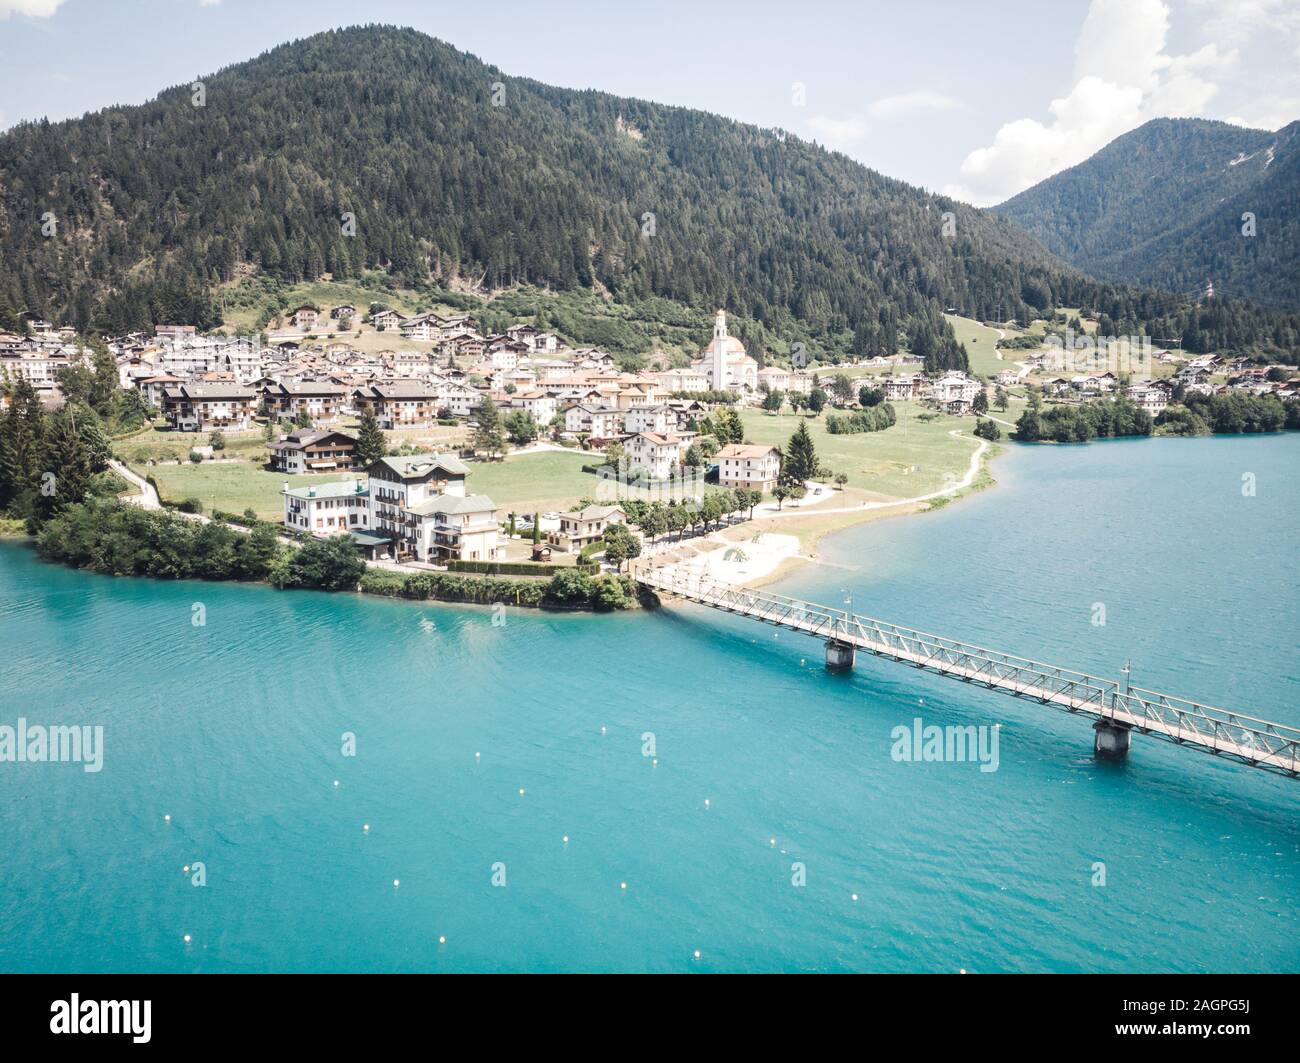 Aerial view of the village Auronzo di Cadore in South Tyrol, Italy Stock Photo